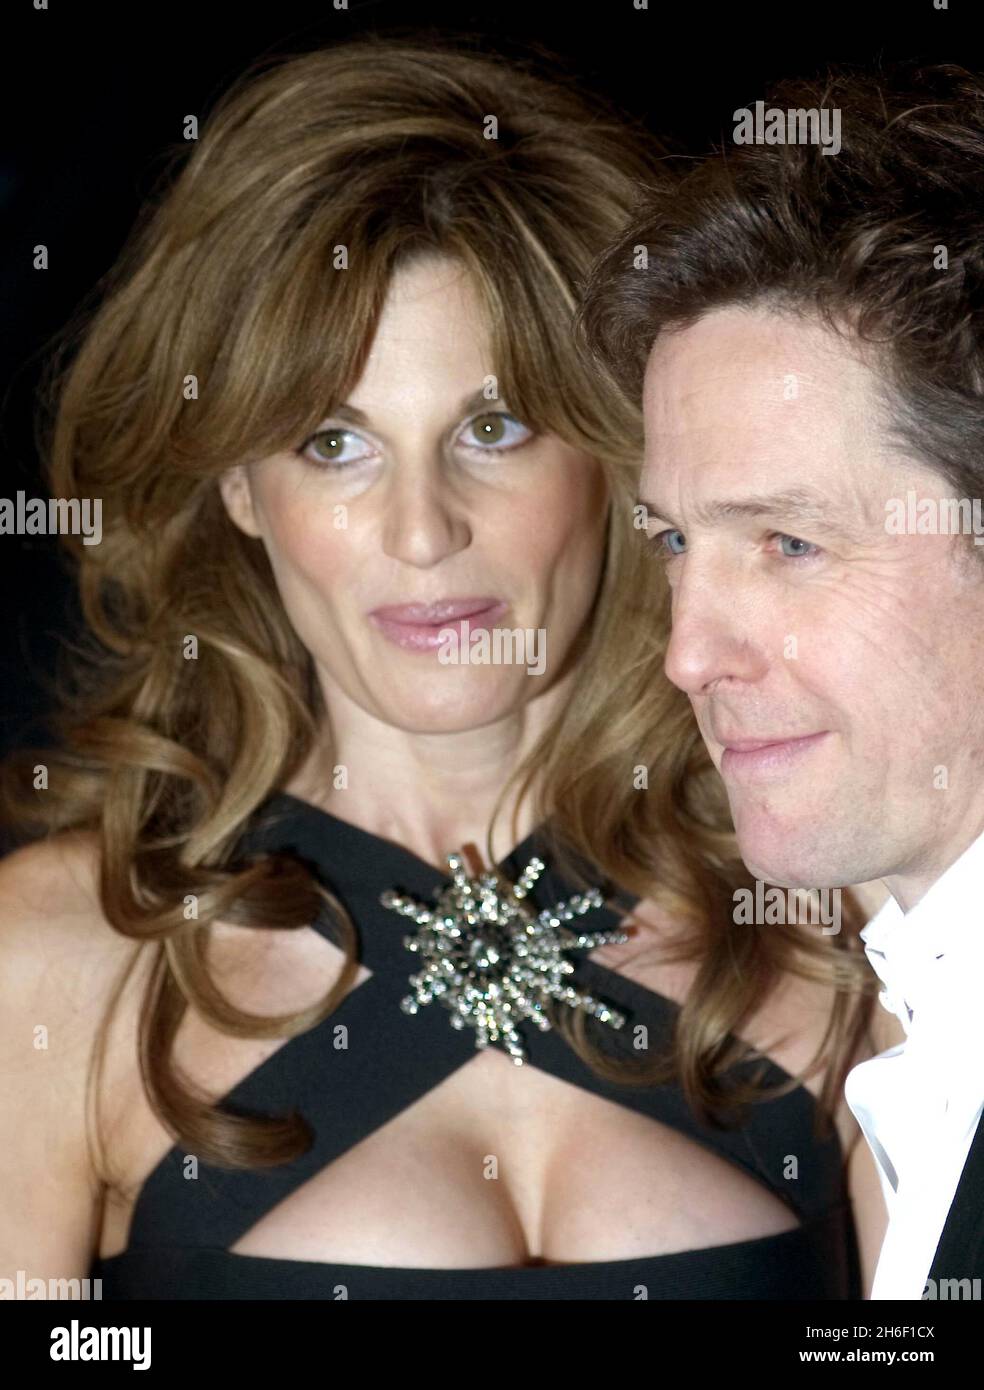 Hugh Grant and girlfriend Jemima Khan pictured arriving at the film premiere of Music And Lyrics at Odeon Cinema in London's Leicester Square. Stock Photo